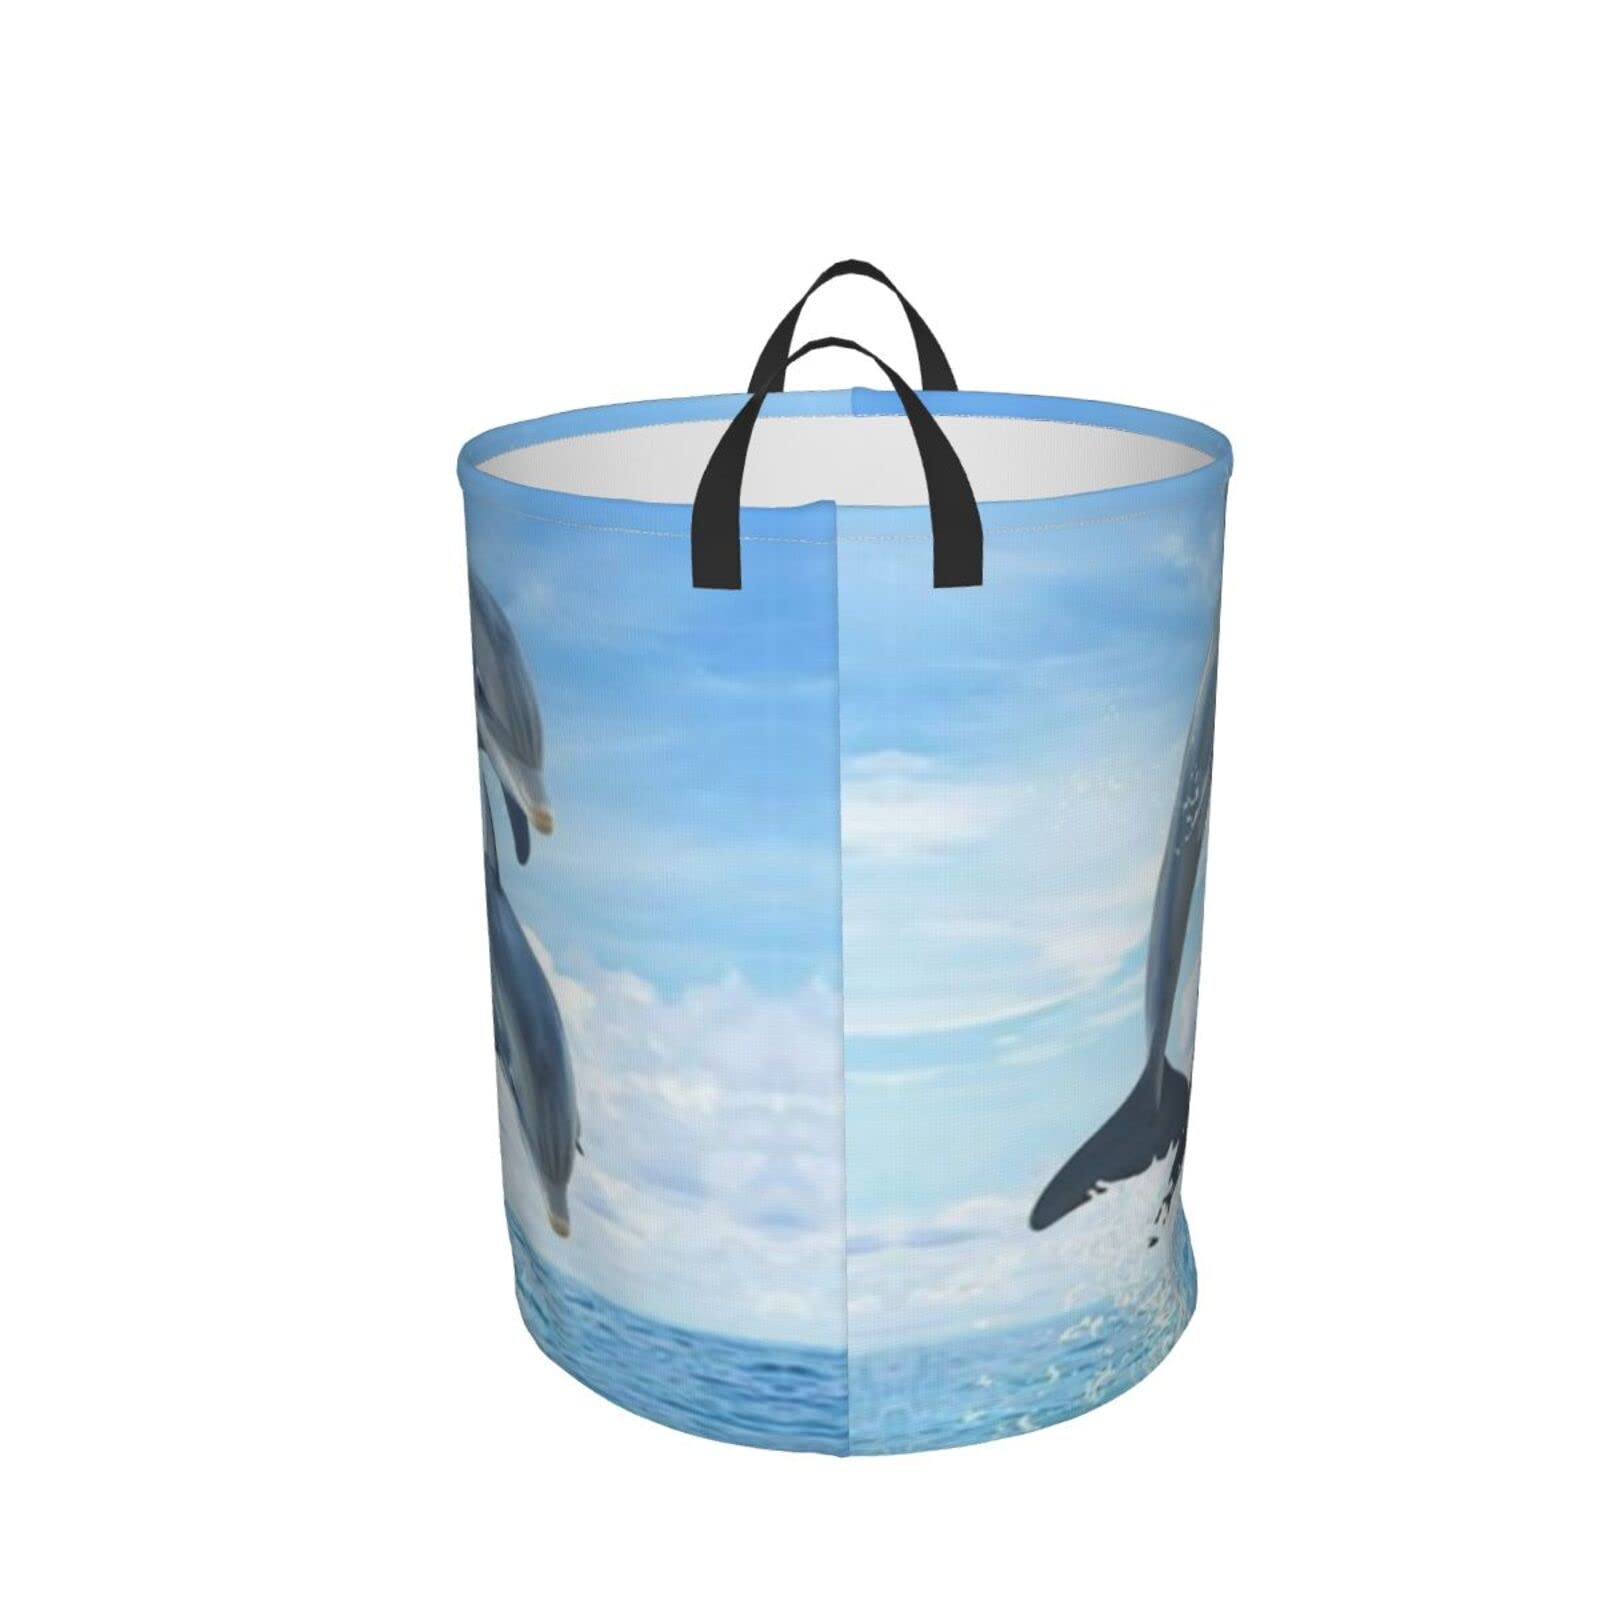 KiuLoam Dolphins 19.6 Inches Large Storage Basket Collapsible Organizer Bin Laundry Hamper for Nursery Clothes Toys